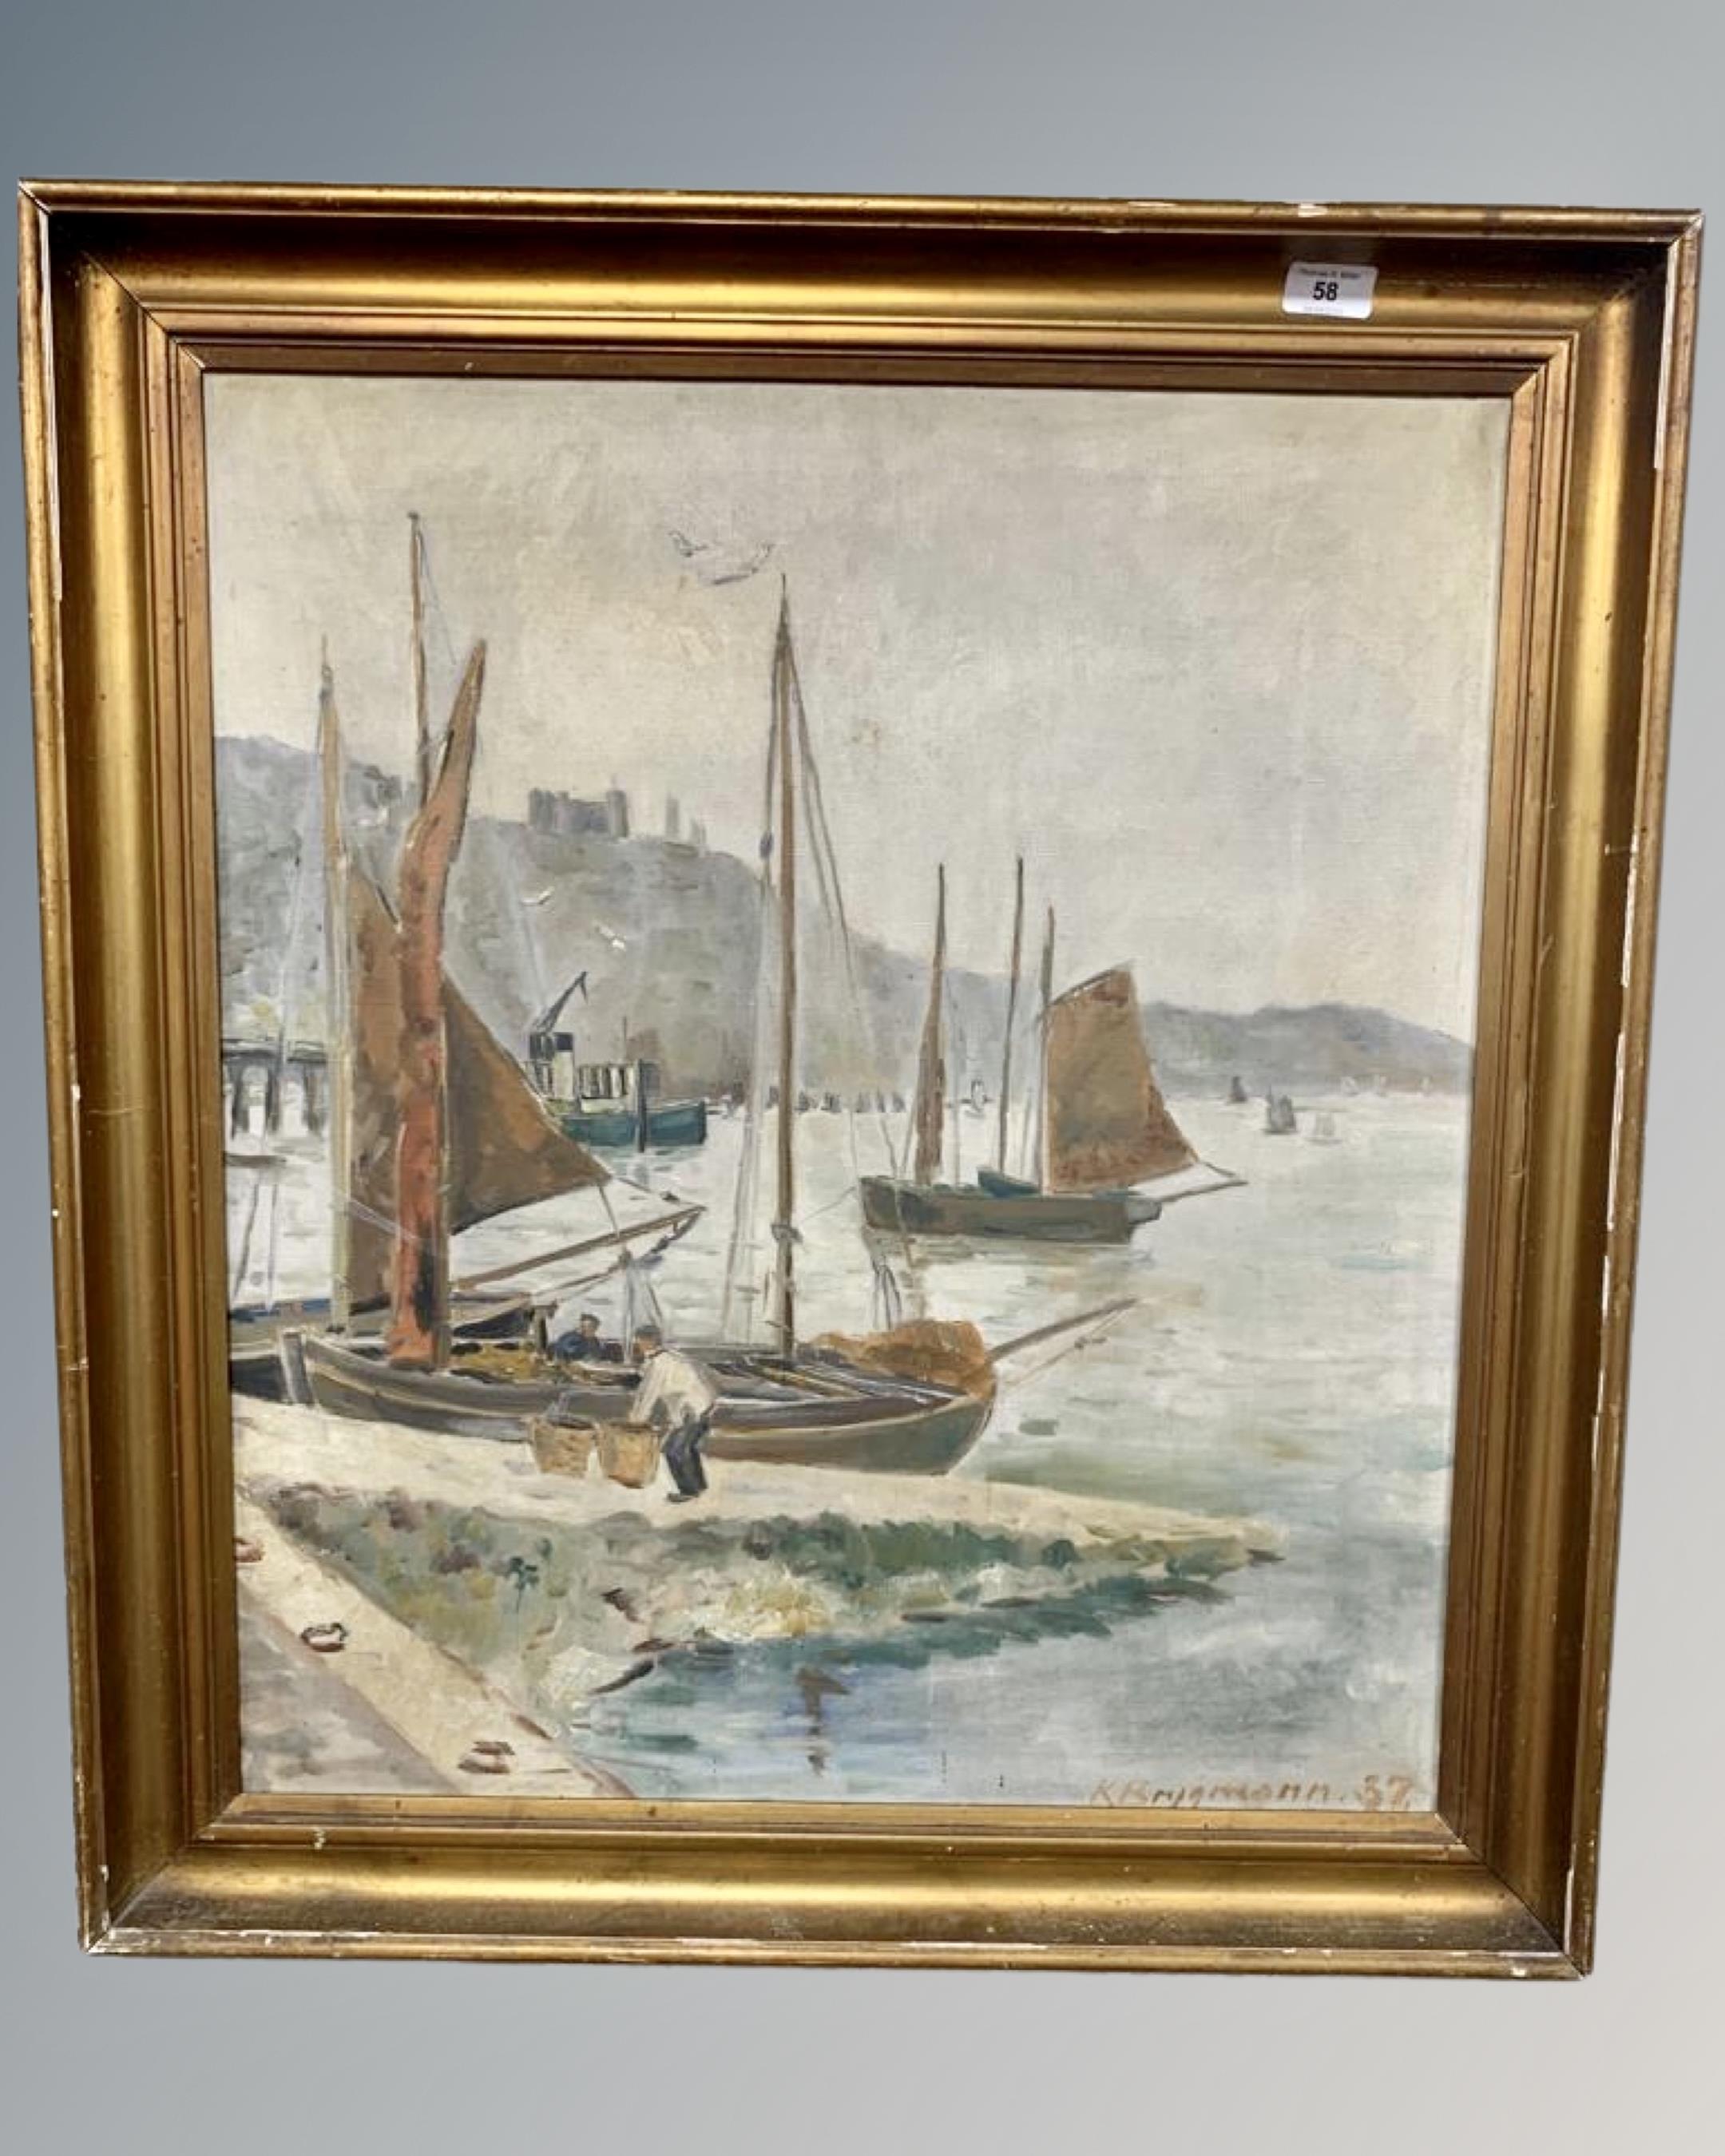 K. Brigmann : Unloading the day's catch, oil on canvas, signed and dated '37, 66cm by 57cm, framed.